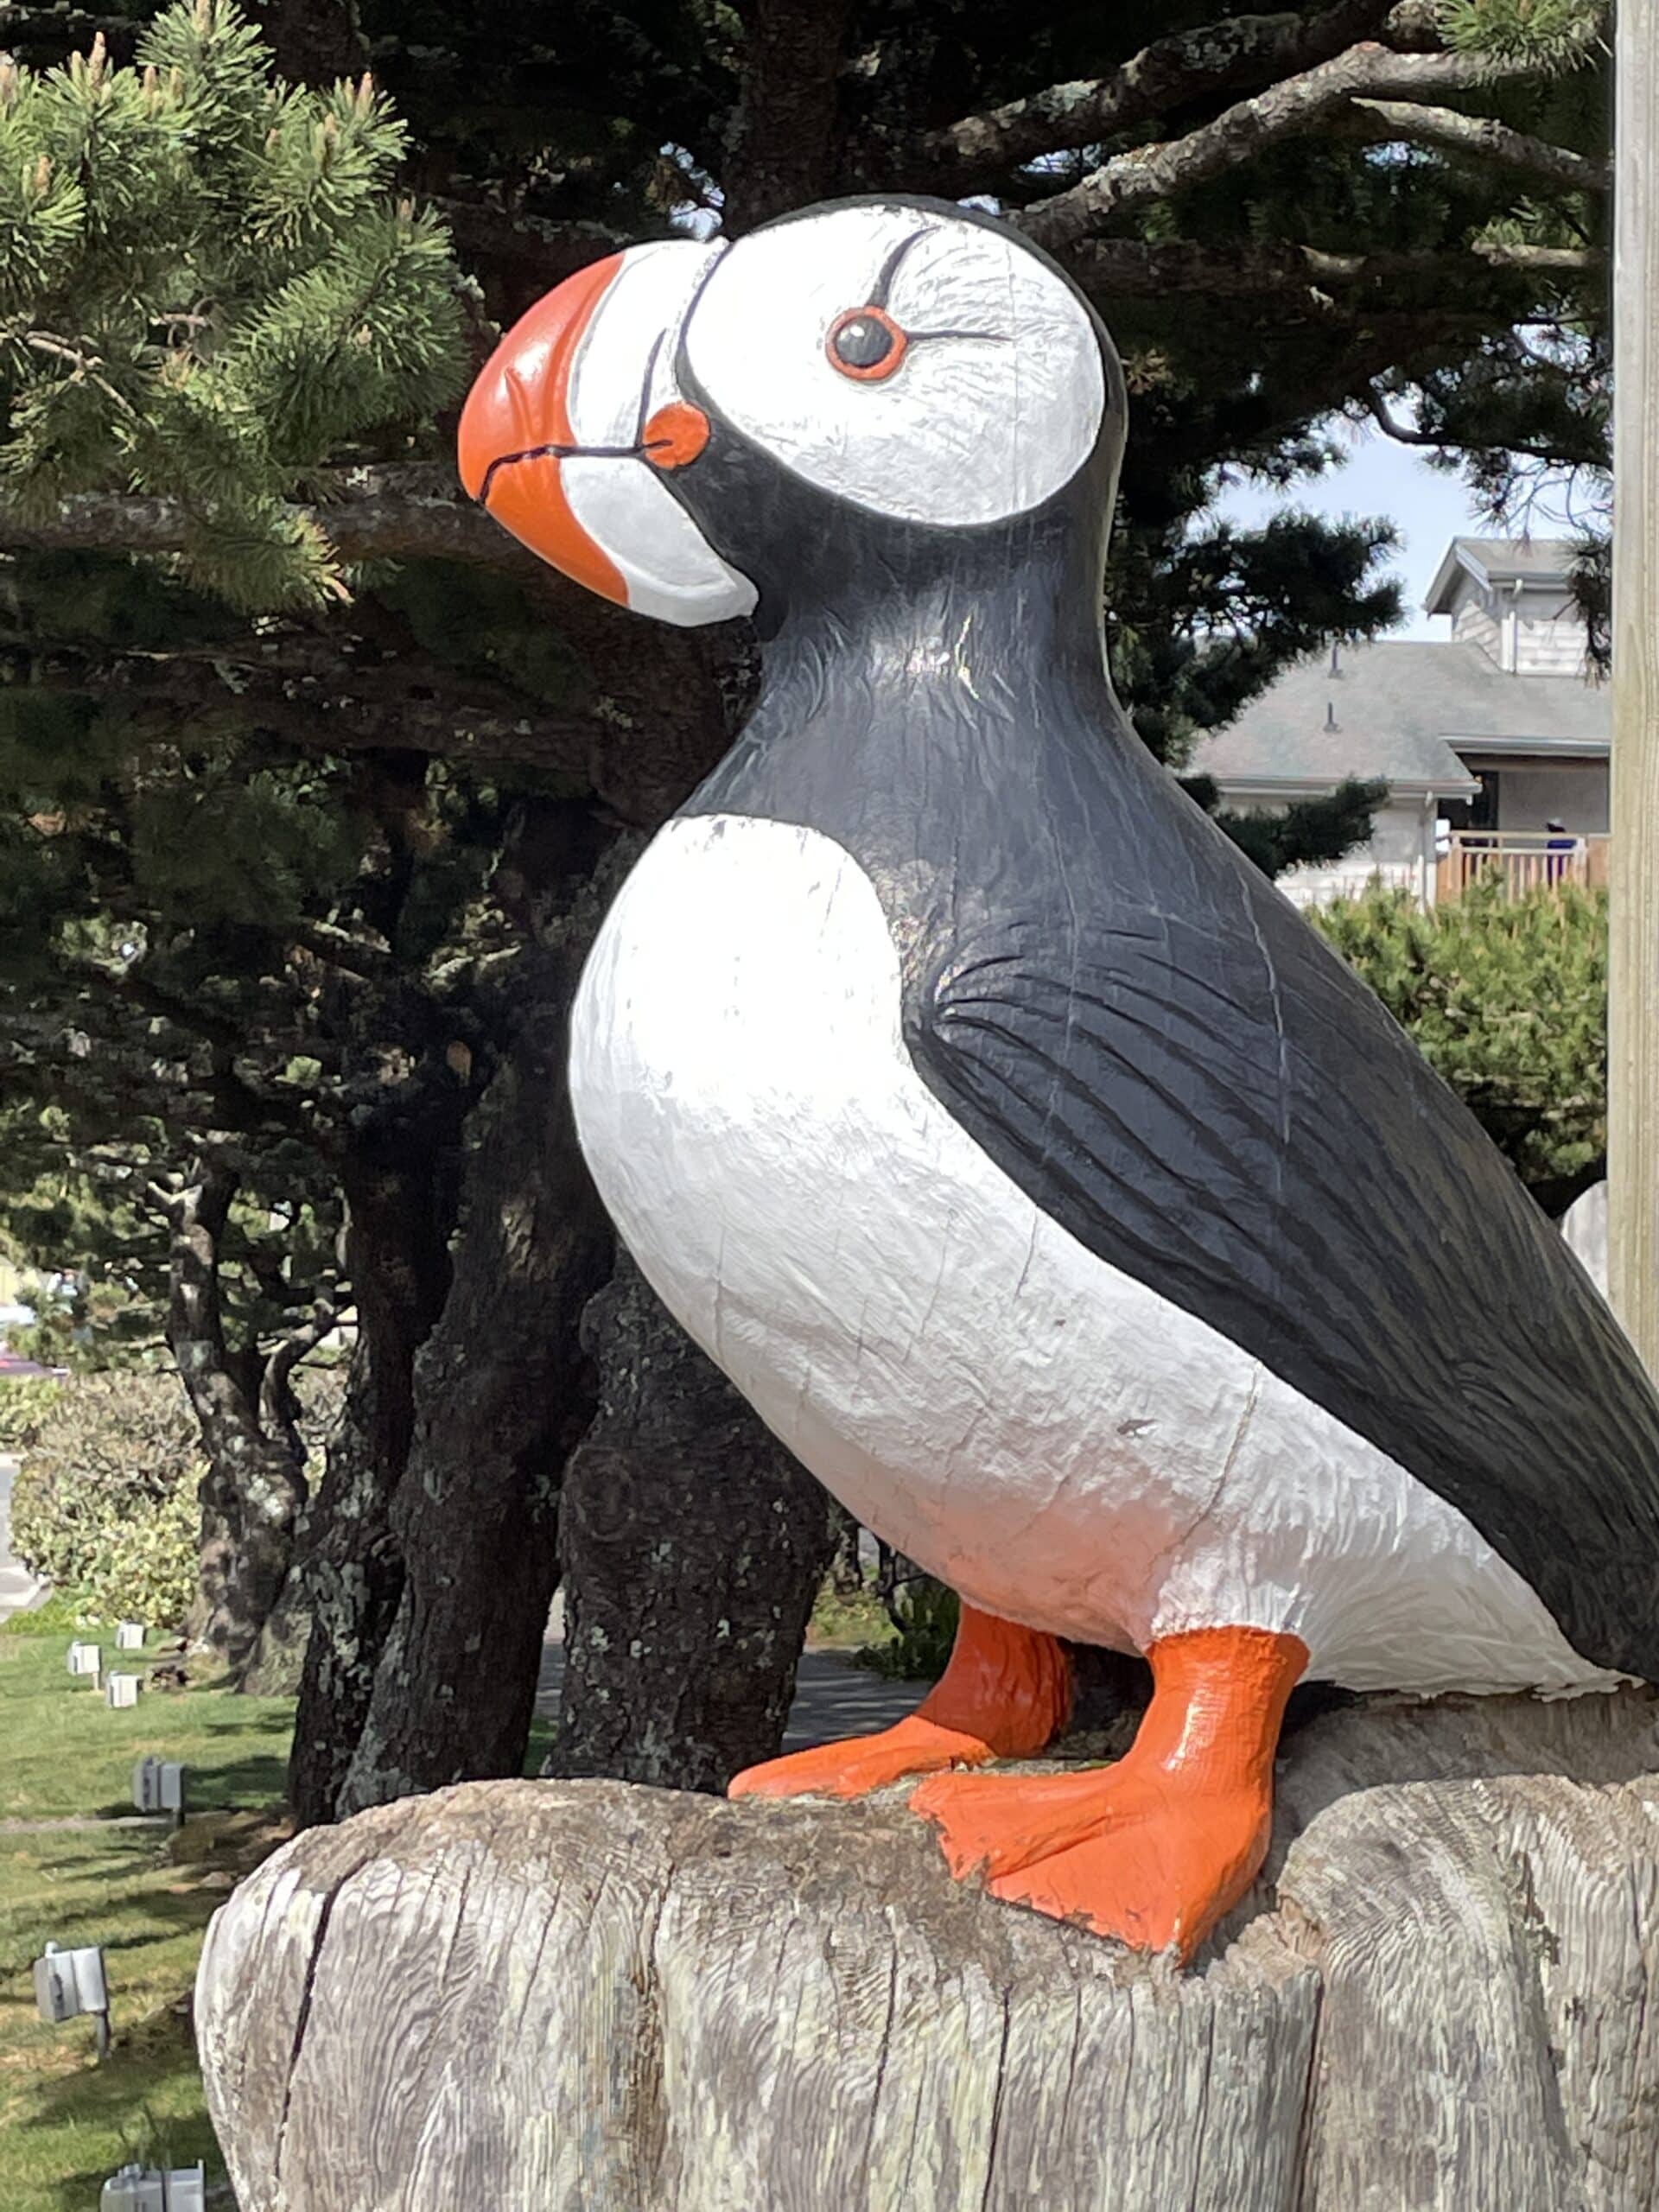 Tufted Puffin sculpture in Cannon Beach